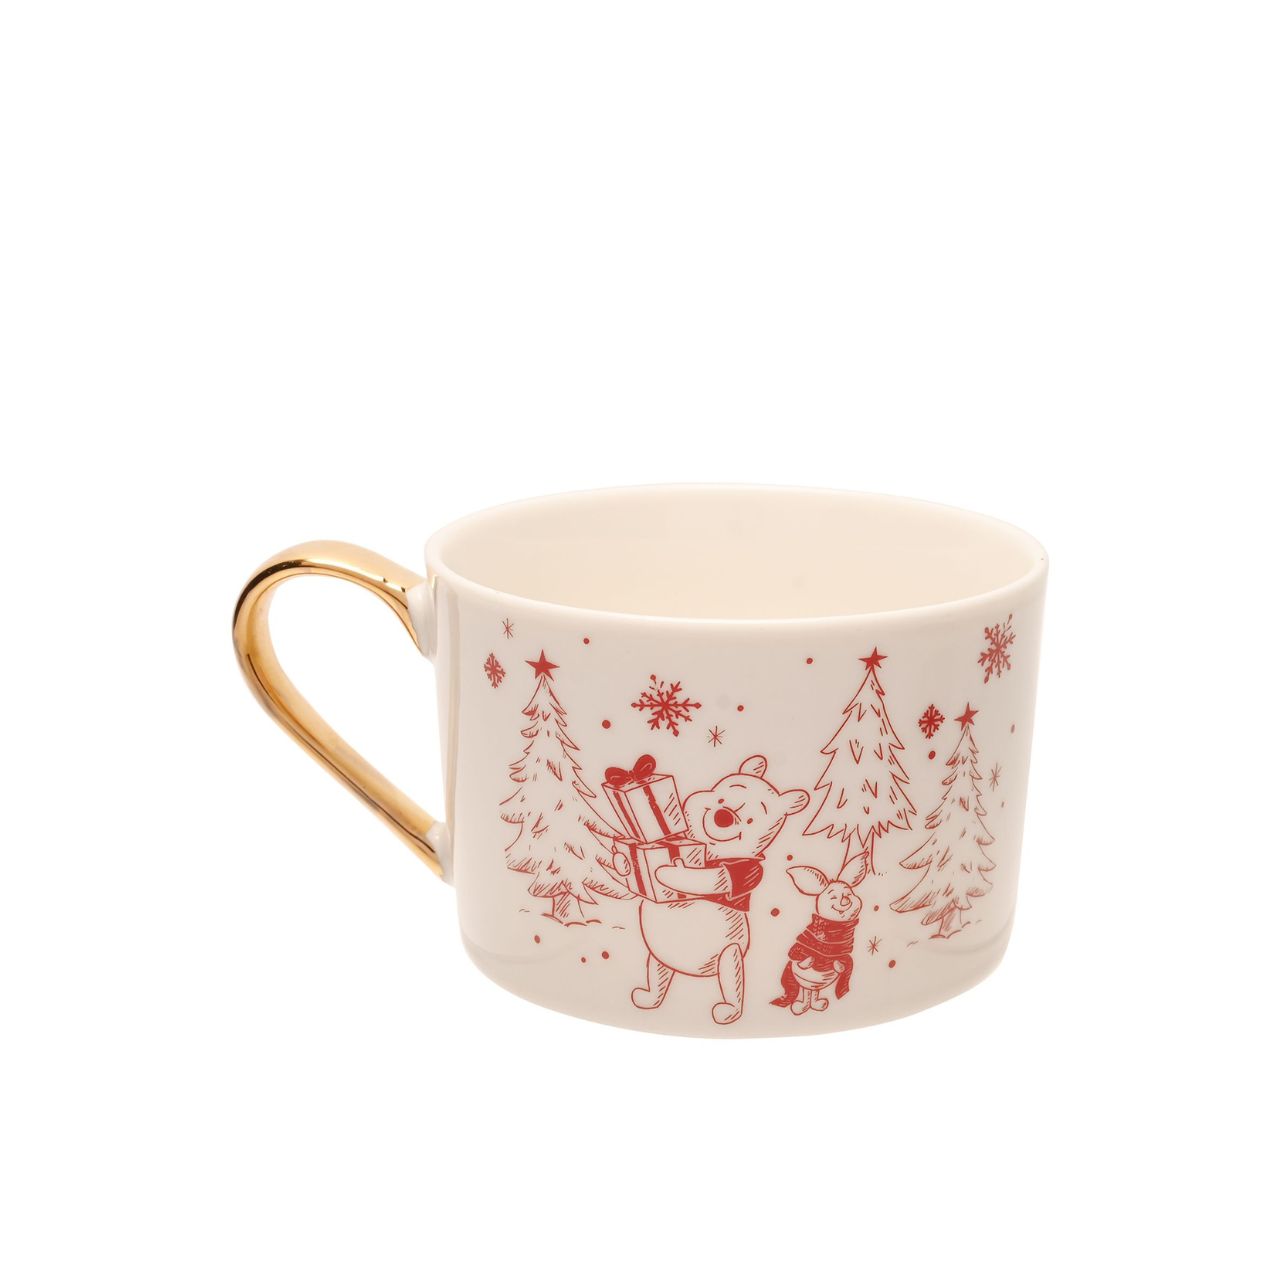 Winnie the Pooh Christmas Cup & Saucer Set  This Winnie the Pooh cup and saucer set would make a heart-warming gift to a Disney fan this year. With delightful festive illustrations of Winnie, Tigger, Piglet, and Eeyore, these are sure to bring a smile to their face on Christmas morning.